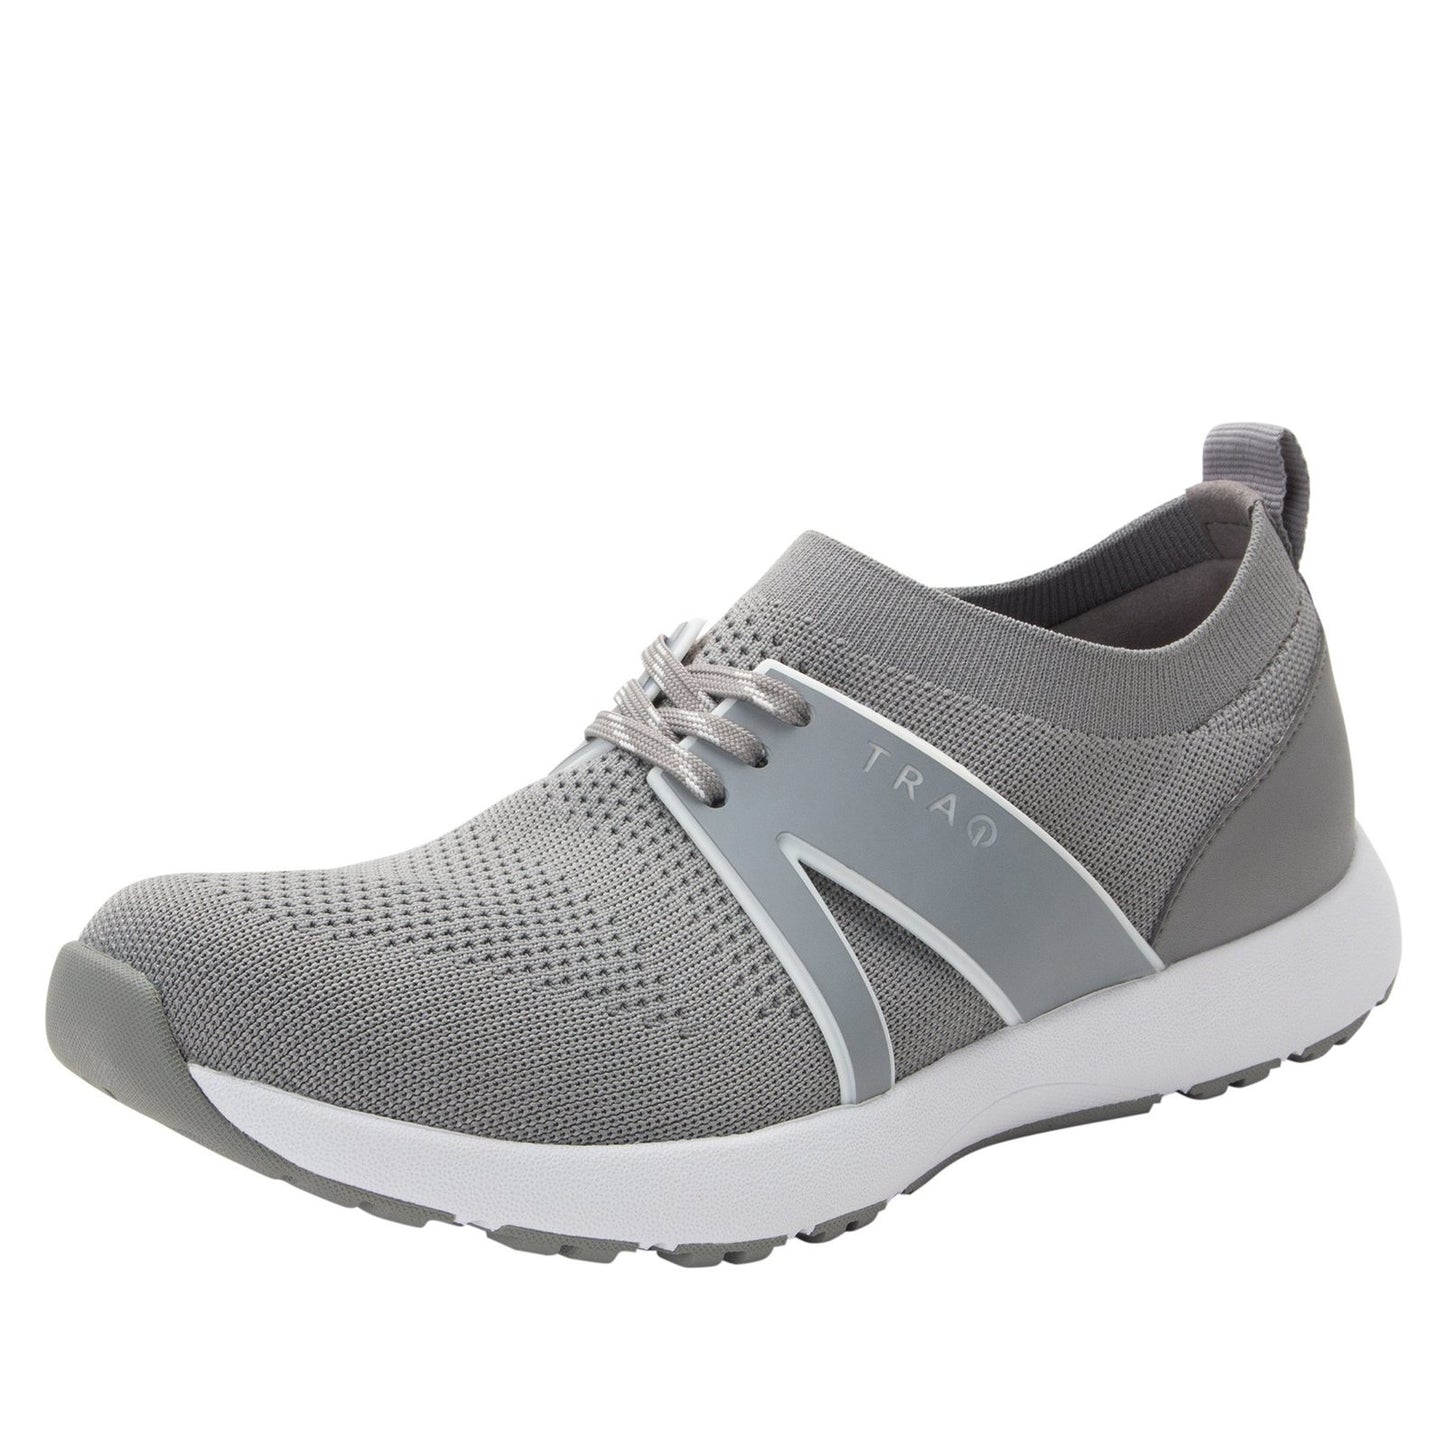 Traq Qool by Alegria in Grey at Parker's Clothing and Shoes.